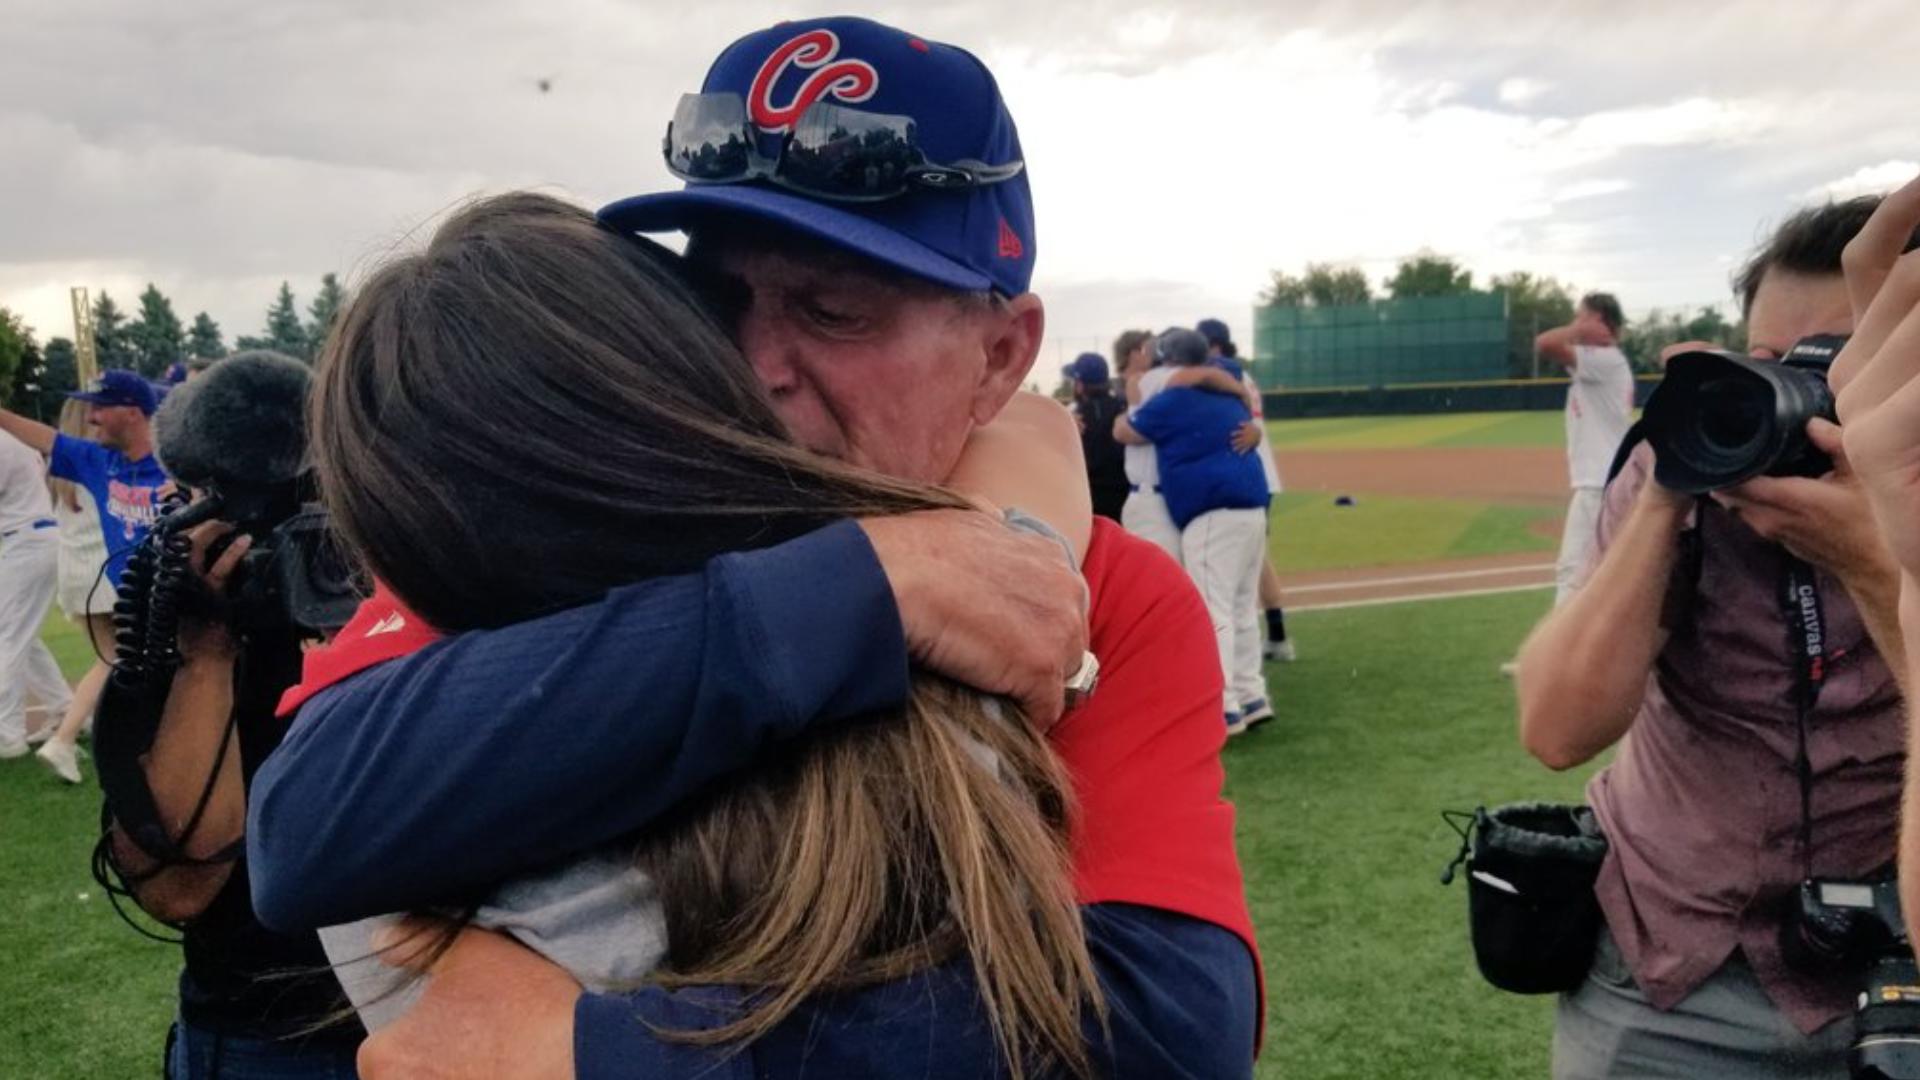 The head coach of the Cherry Creek Bruins won his 9th state championship in his 52nd and final season.